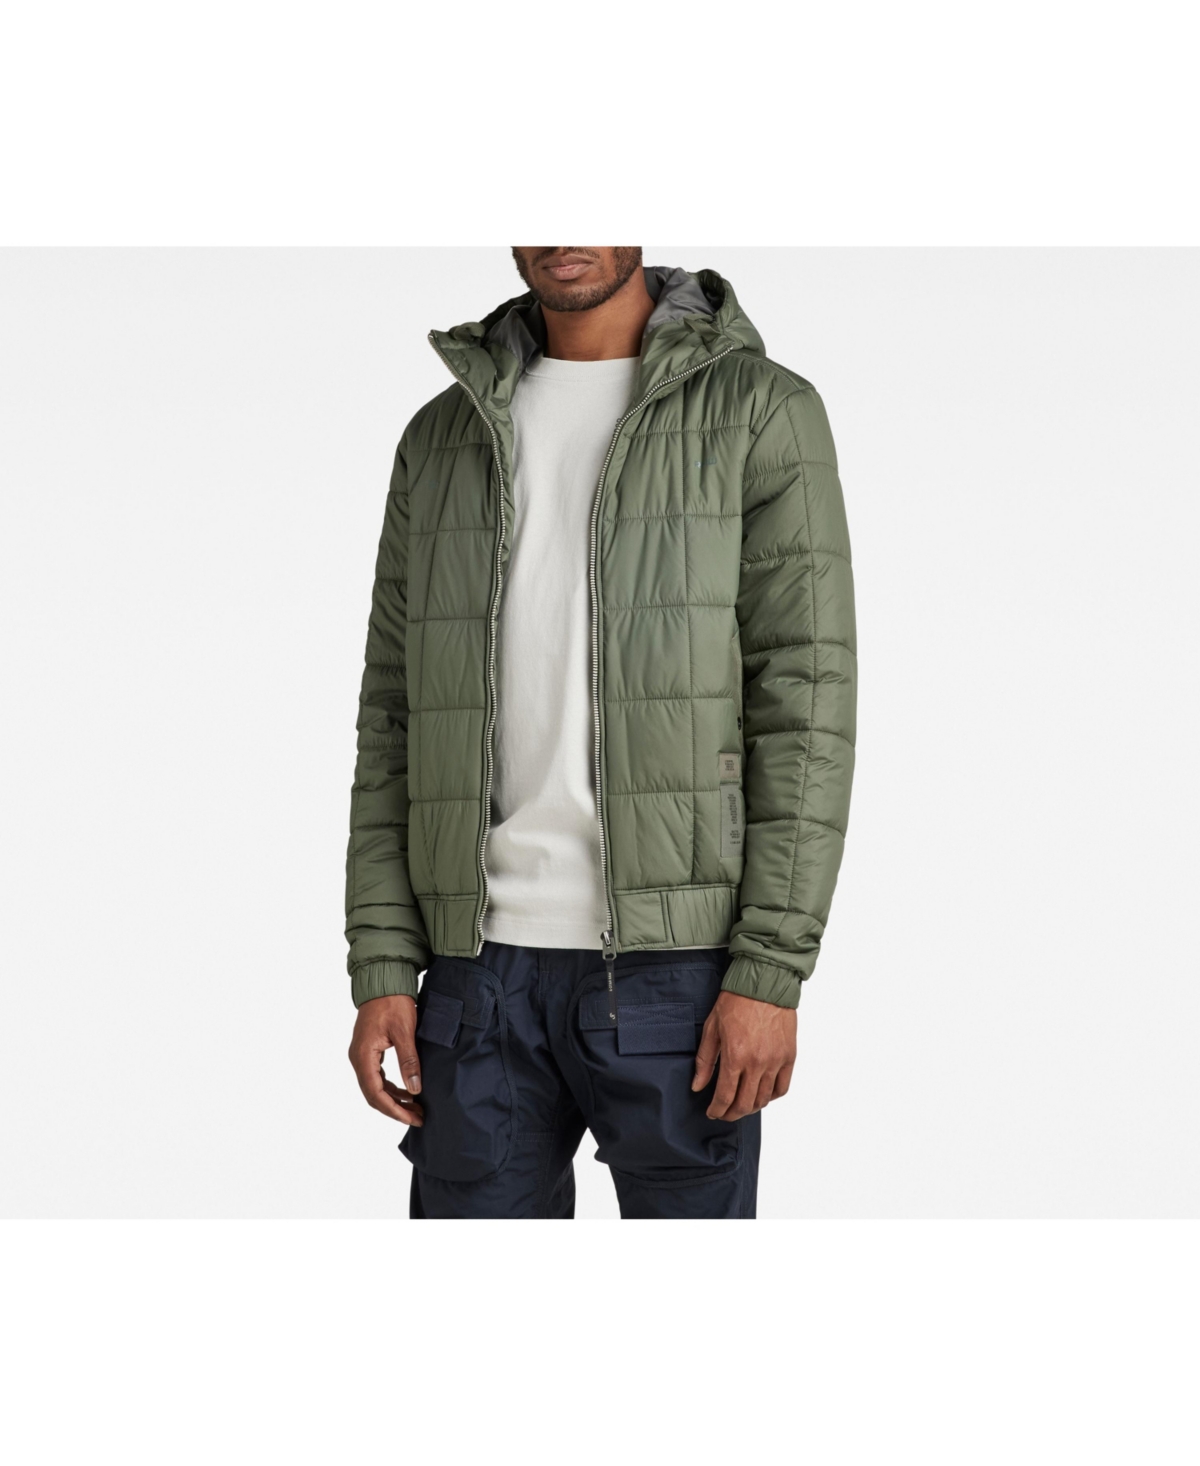 G-Star Raw Men's Meefic Square Quilted Jacket